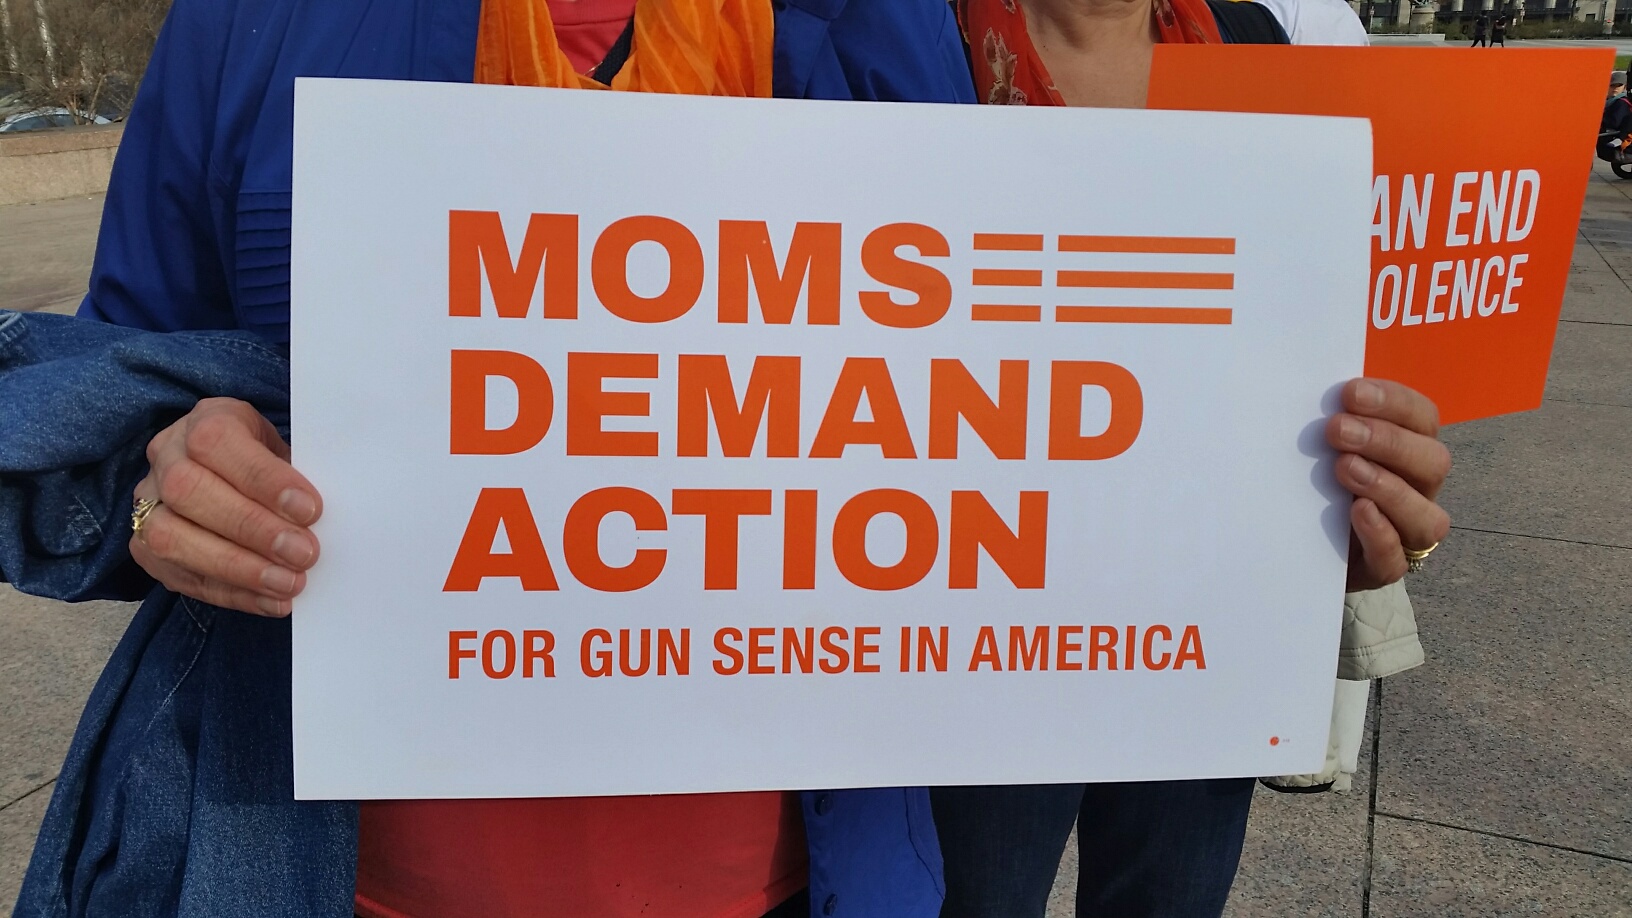 Local chapters of the Moms Demand Action for Gun Sense in America led an "Orange Walk' from Freedom Plaza to the White House on Sunday, Dec. 13, 2015, nearly three years since the massacre at Sandy Hook. Thousands of people nationwide participated in the Orange Walk movement nationwide. (WTOP/Kathy Stewart)